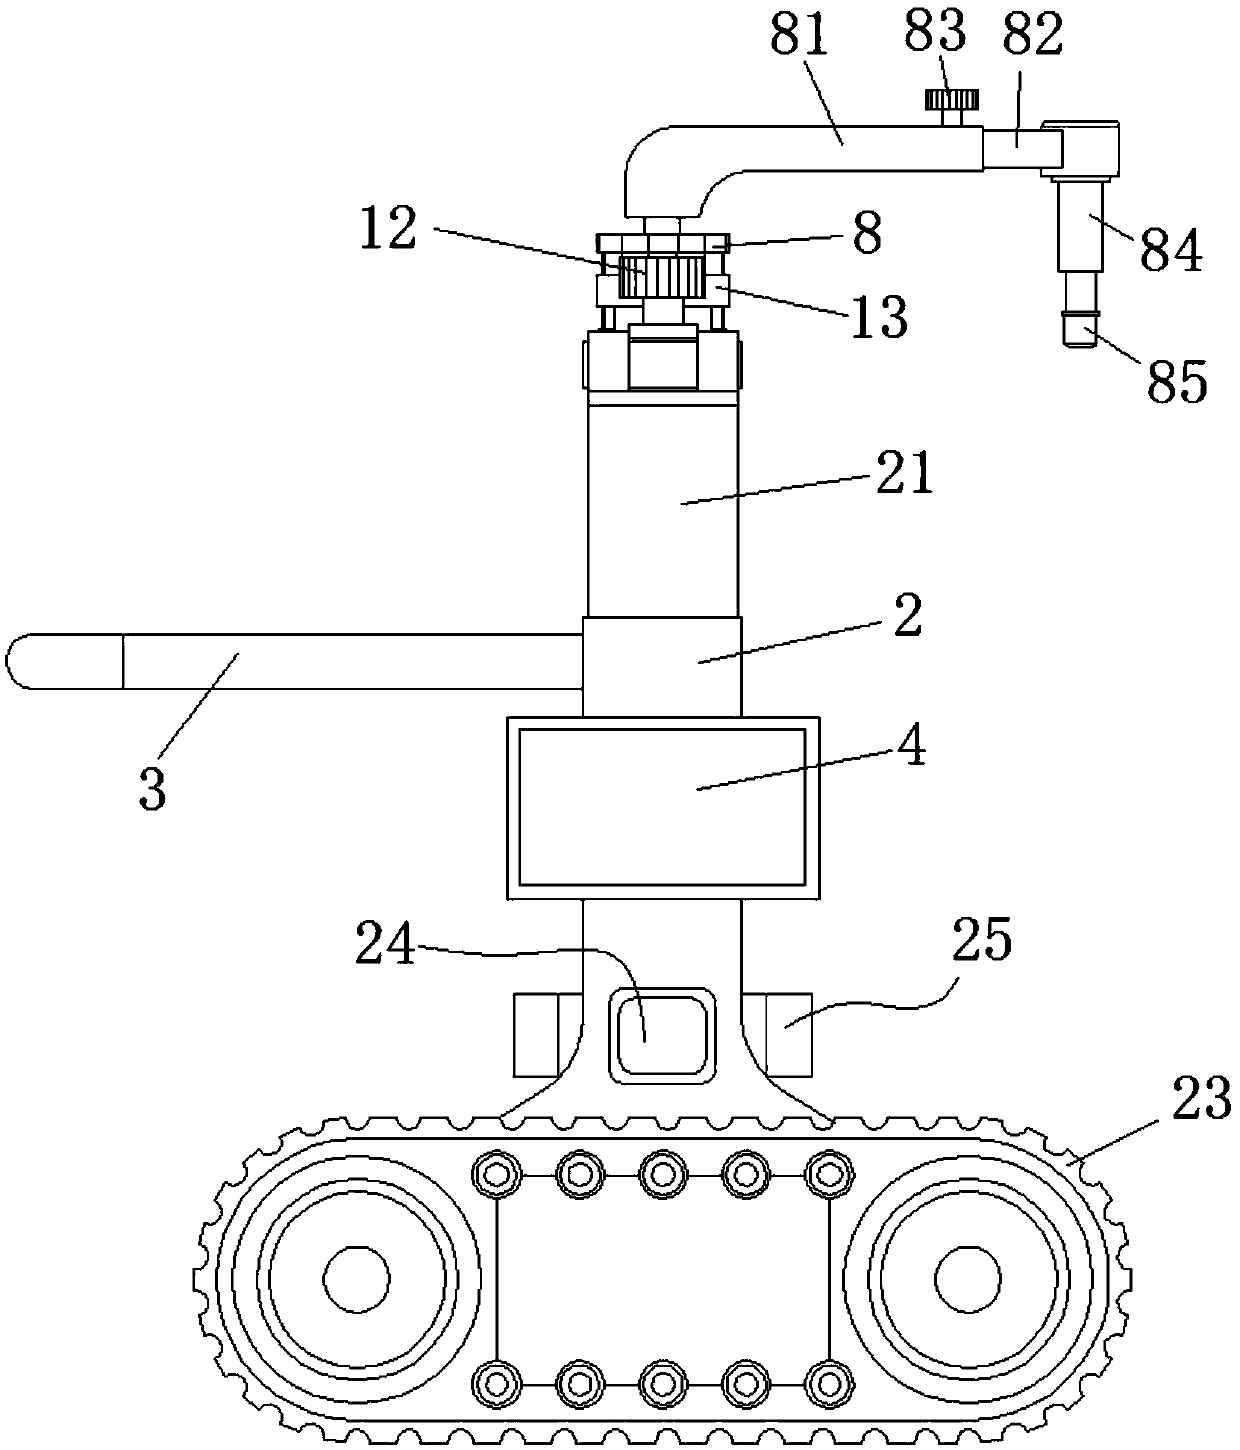 Small-strain detection robot for detecting integrity of pile foundation